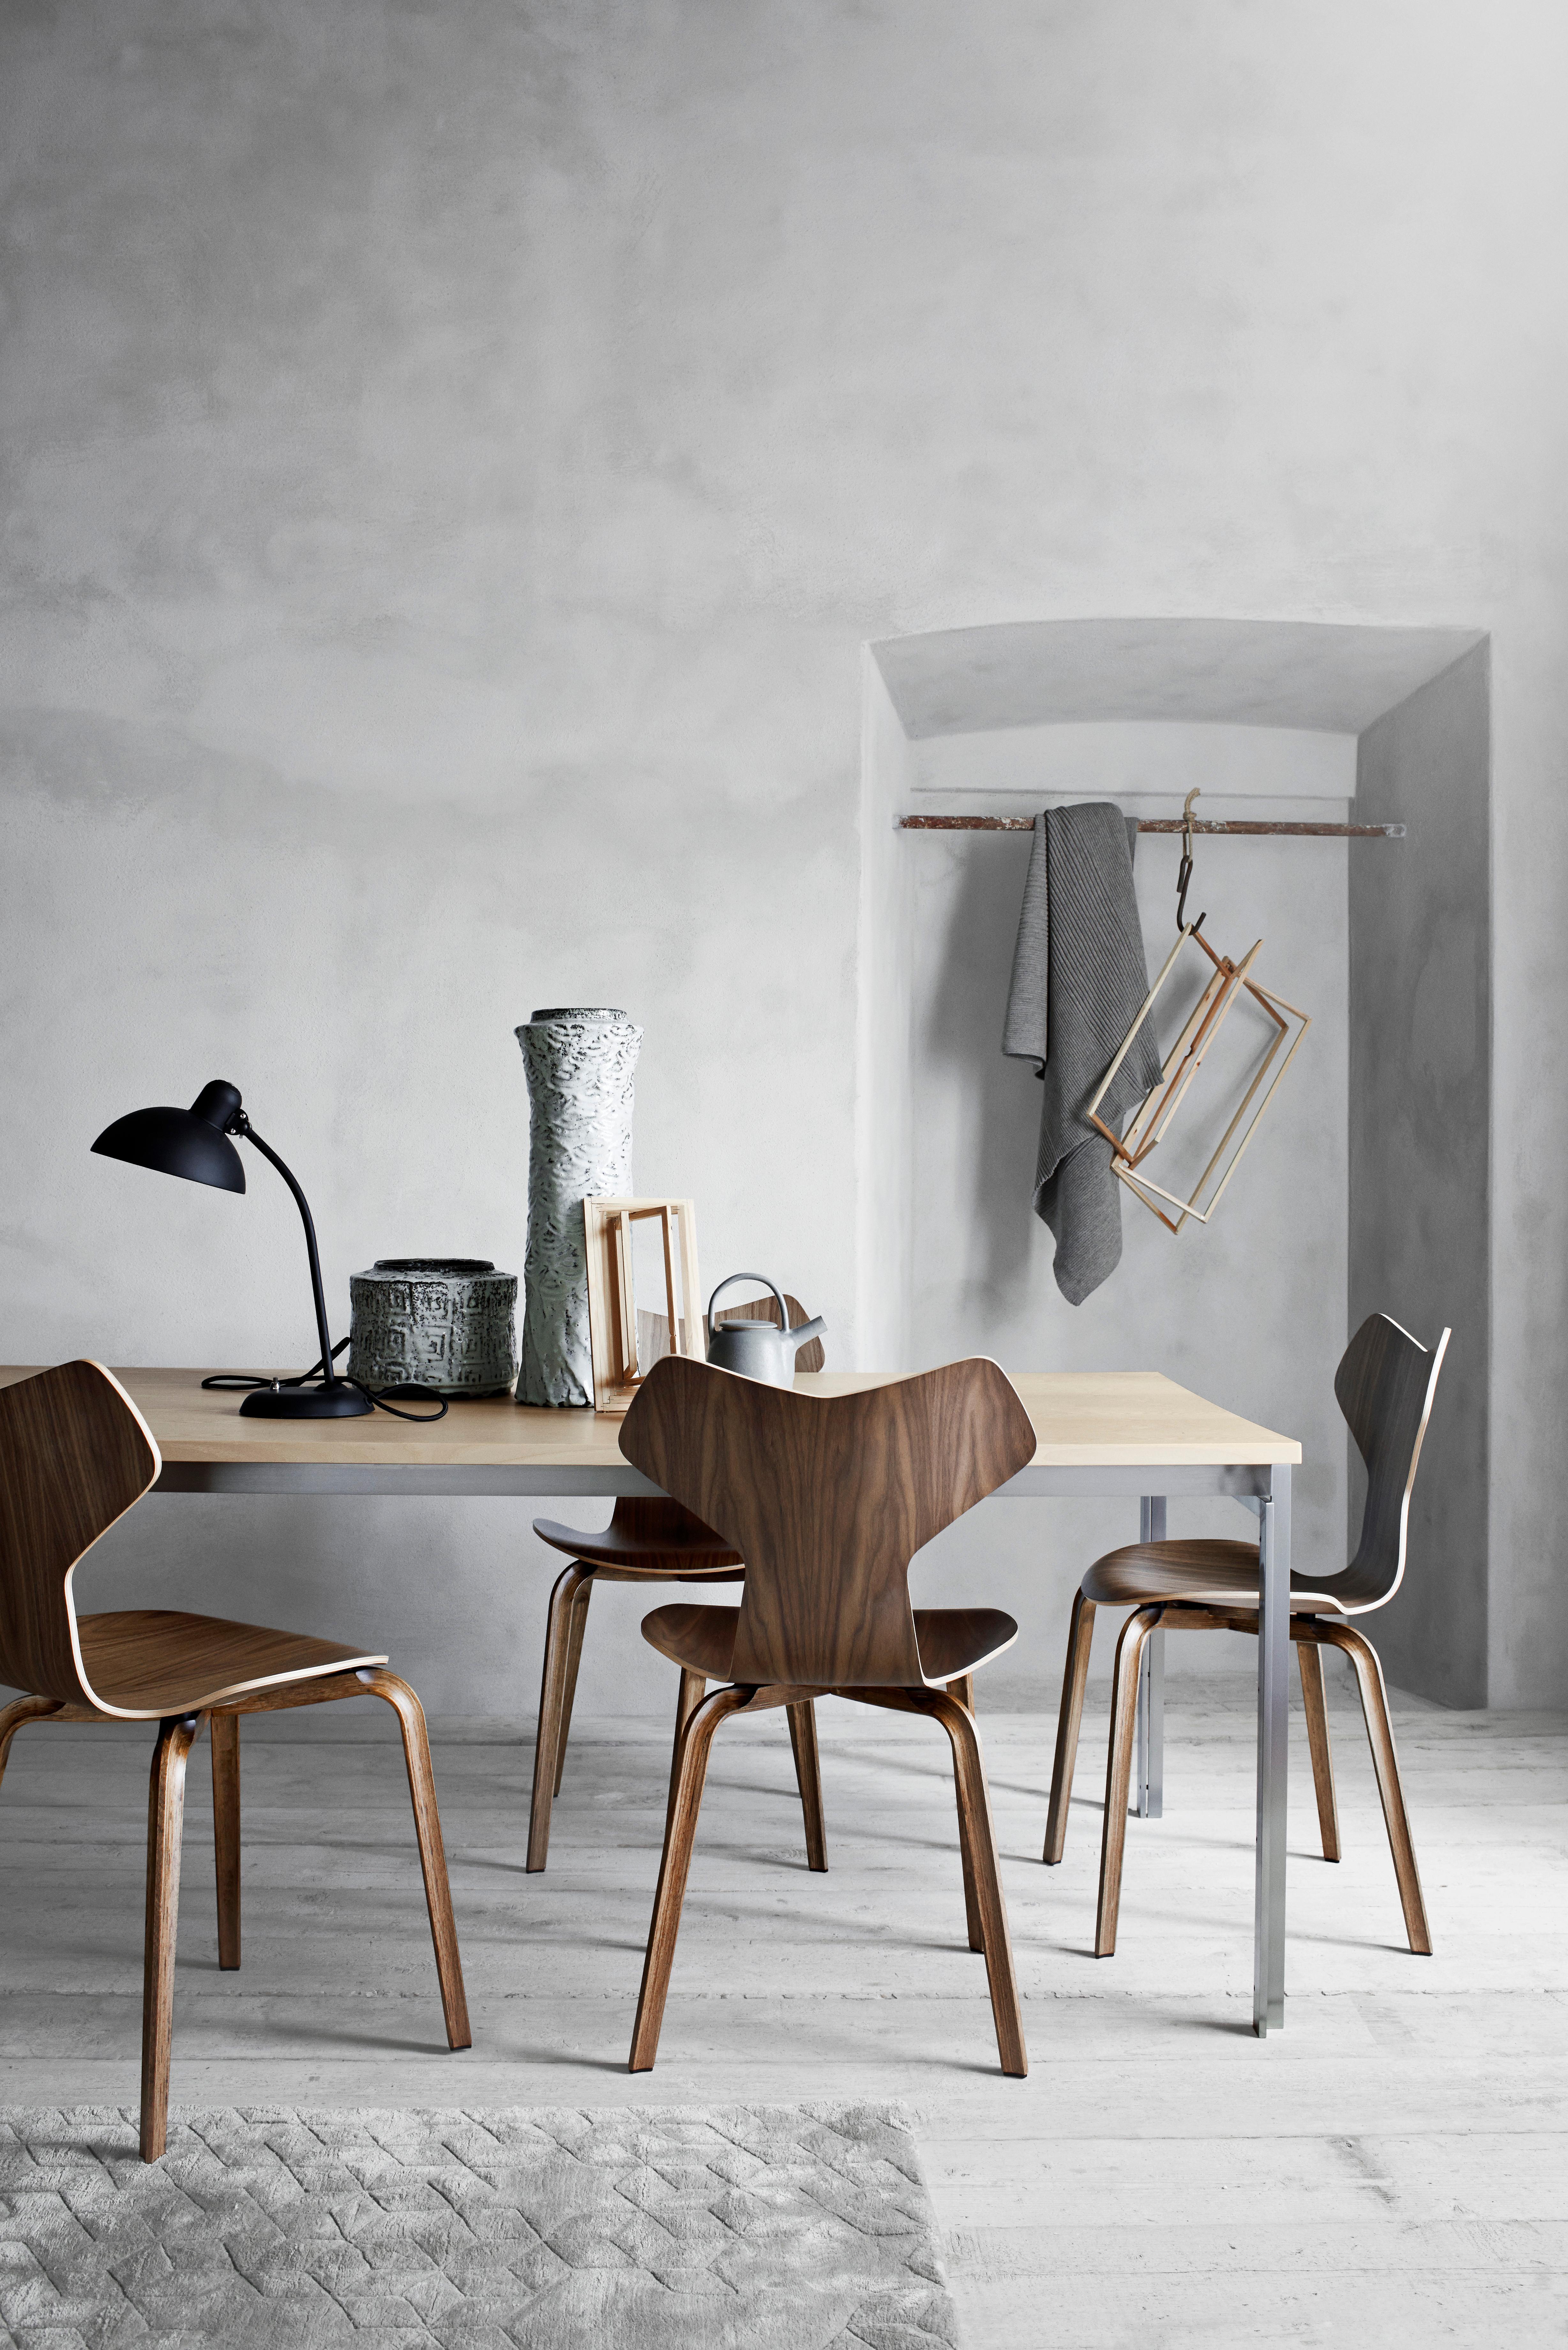 Poul Kjærholm 'PK55' Table or Desk for Fritz Hansen.

Established in 1872, Fritz Hansen has become synonymous with legendary Danish design. Combining timeless craftsmanship with an emphasis on sustainability, the brand’s re-editions of iconic pieces